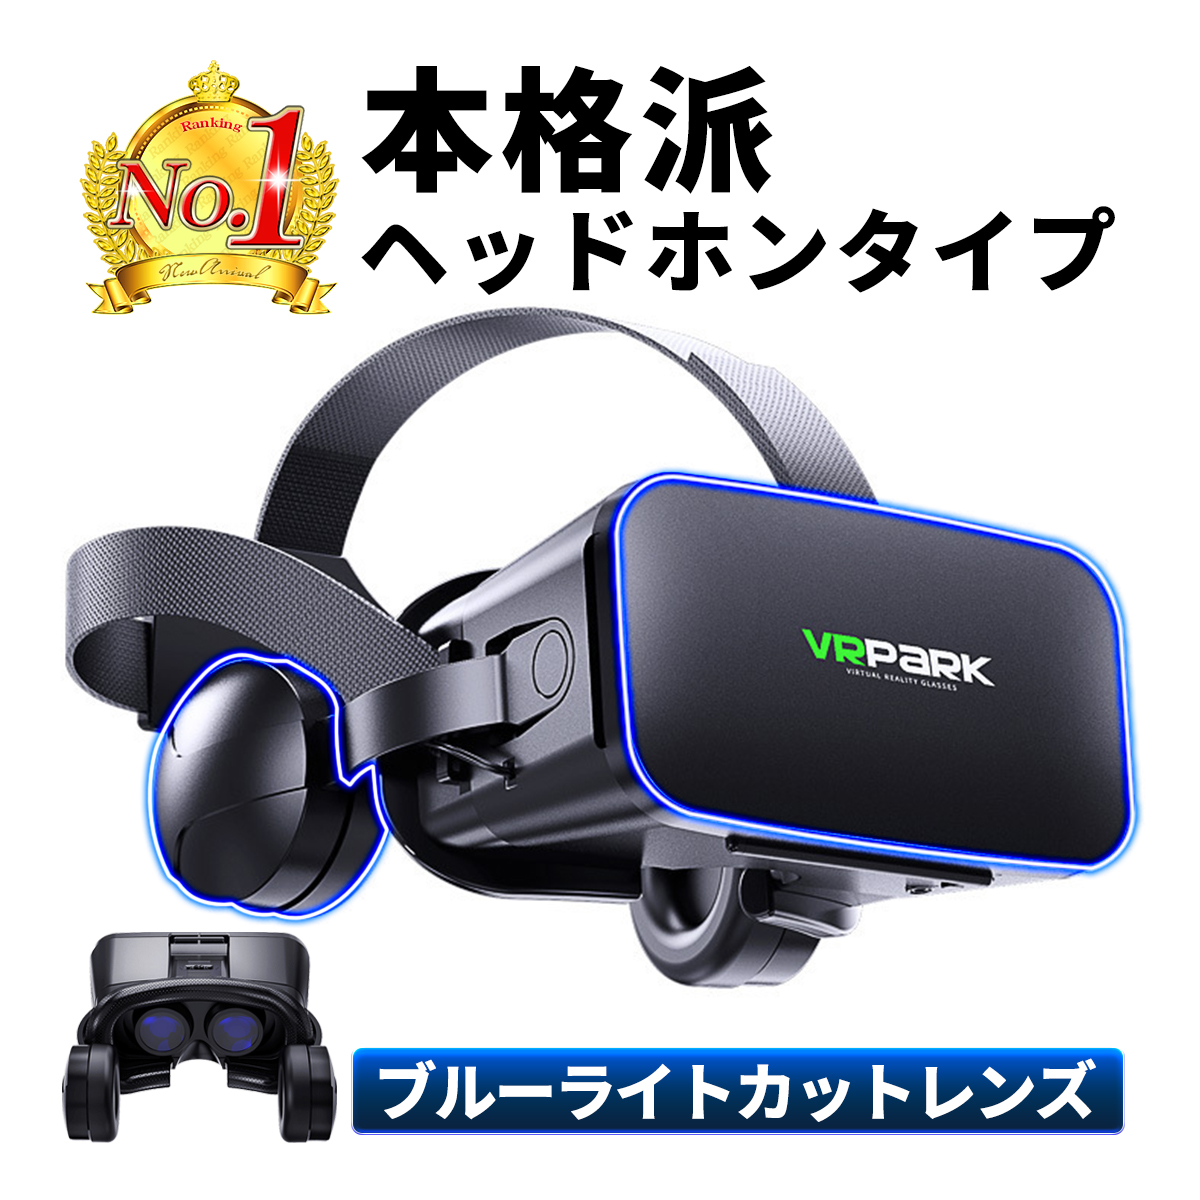 VR goggle headphone attaching headset VR headset 3D glasses VR animation viewing glass correspondence smartphone black 